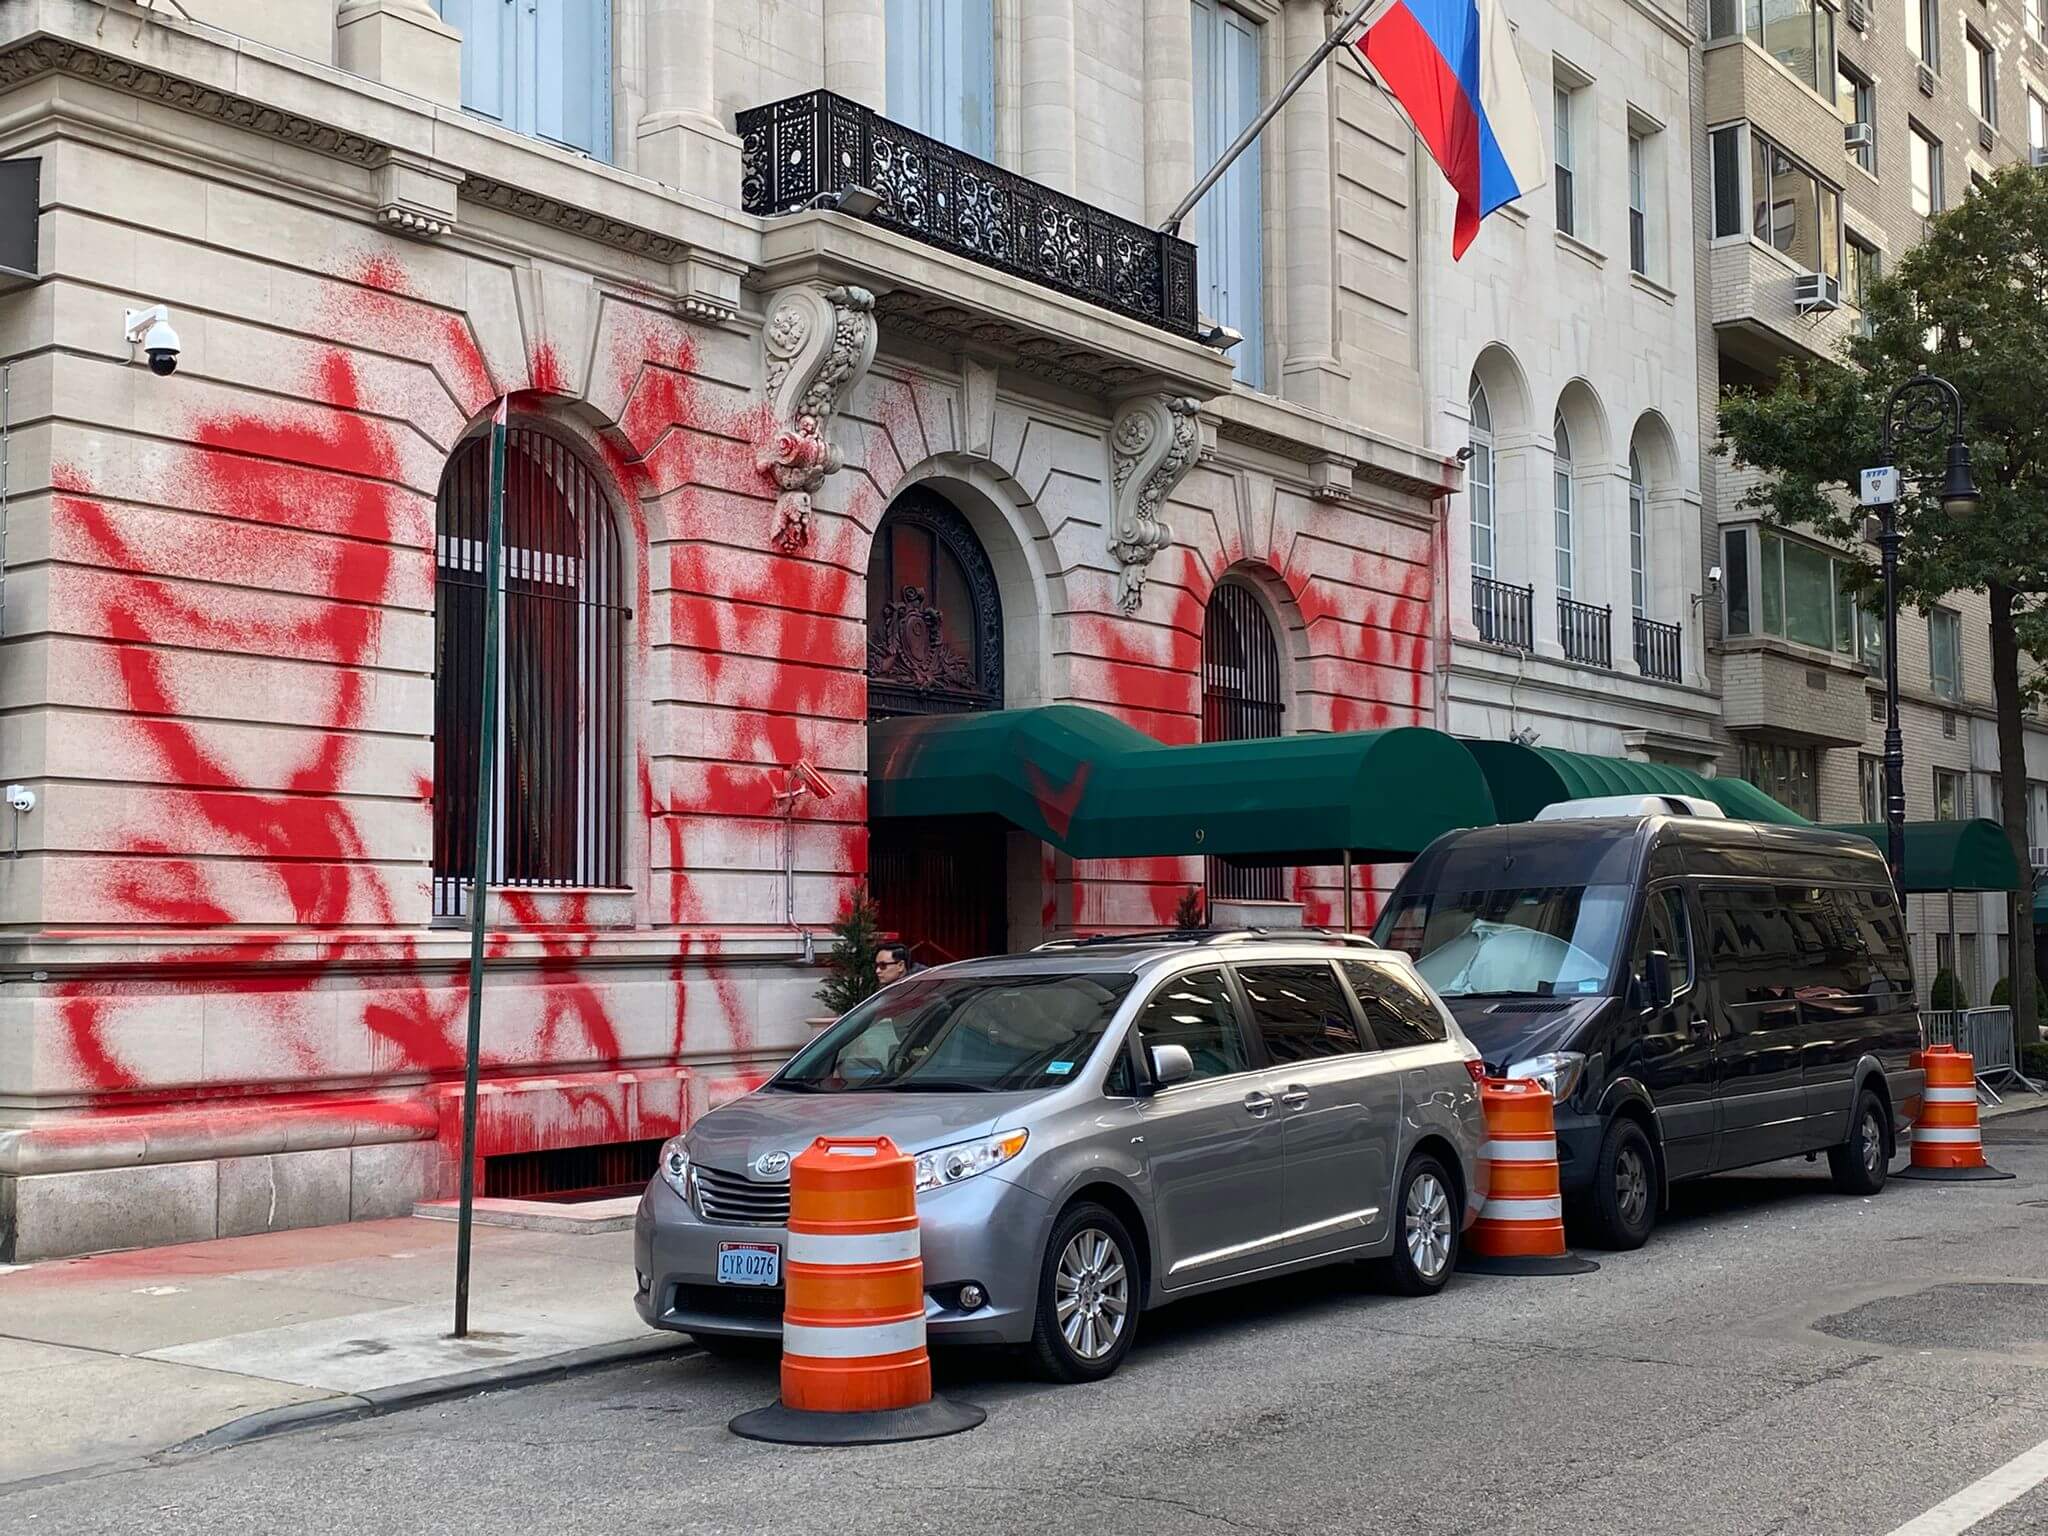 Russian Consulate Building On Upper East Side Doused In Red Paint In